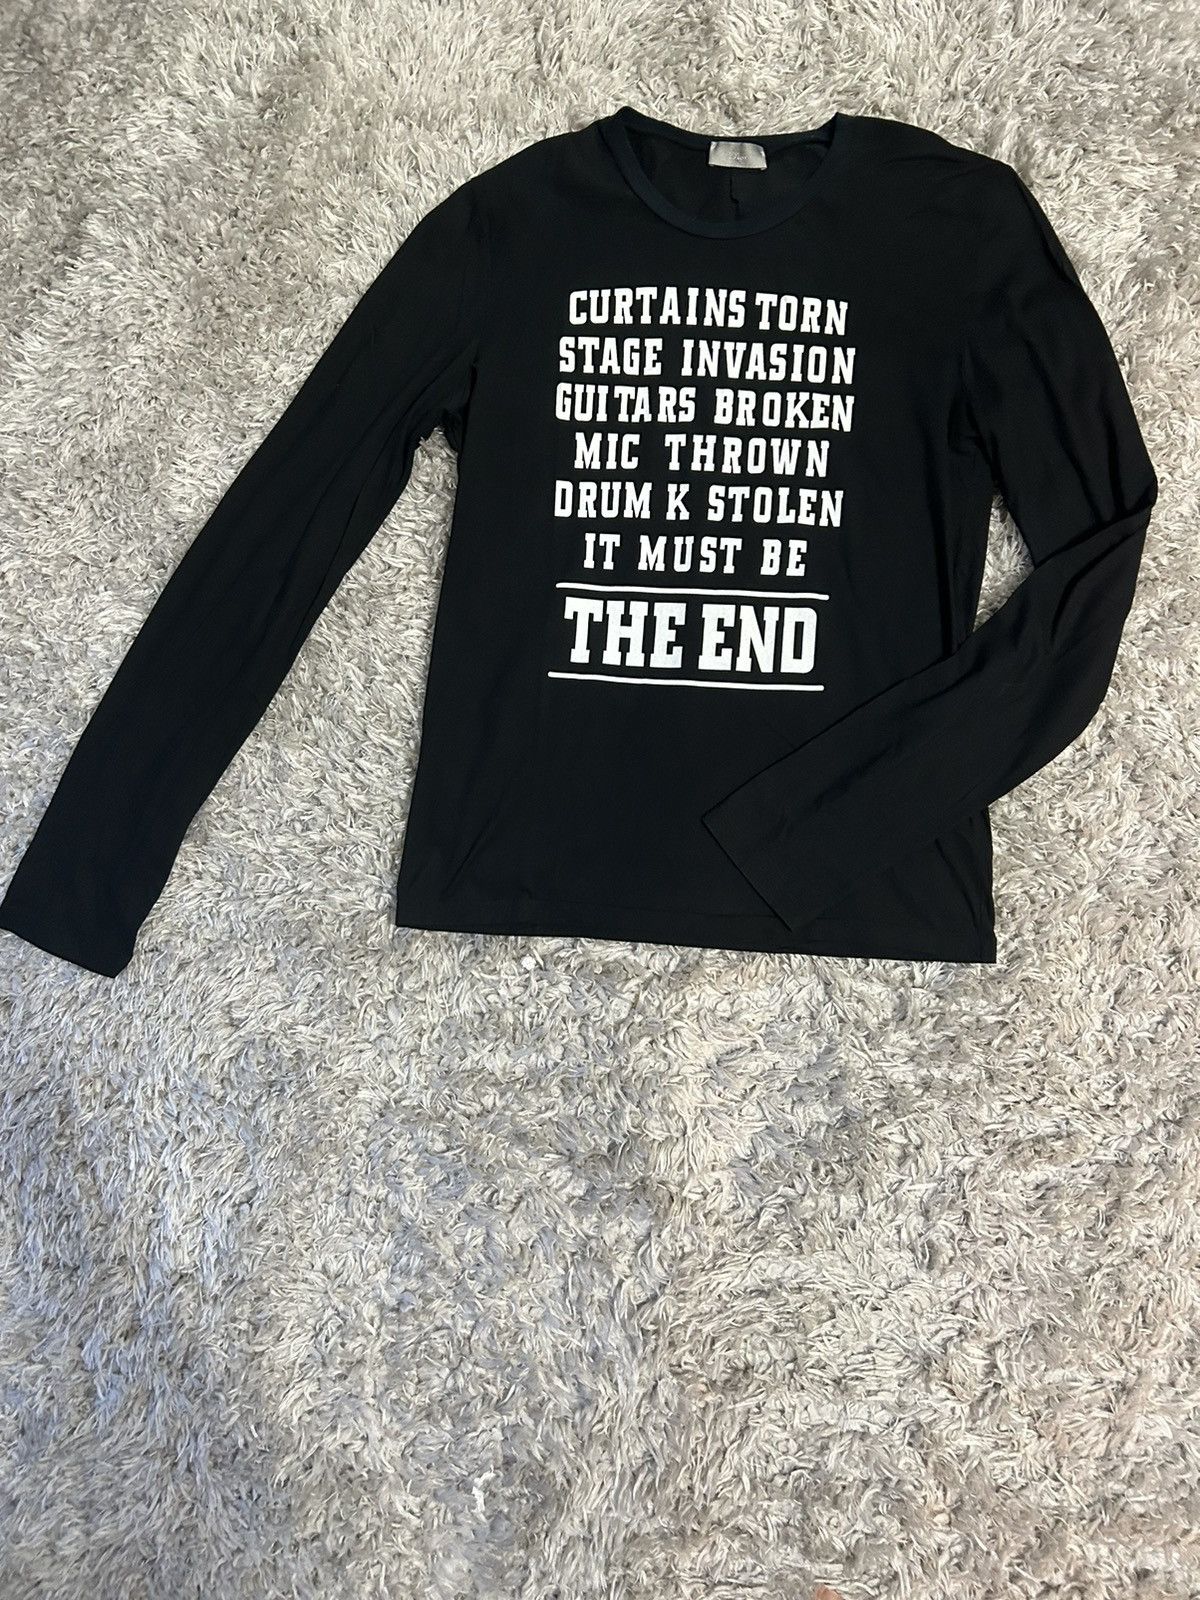 Dior Dior Homme AW05 “The End” Runway long sleeve | Grailed